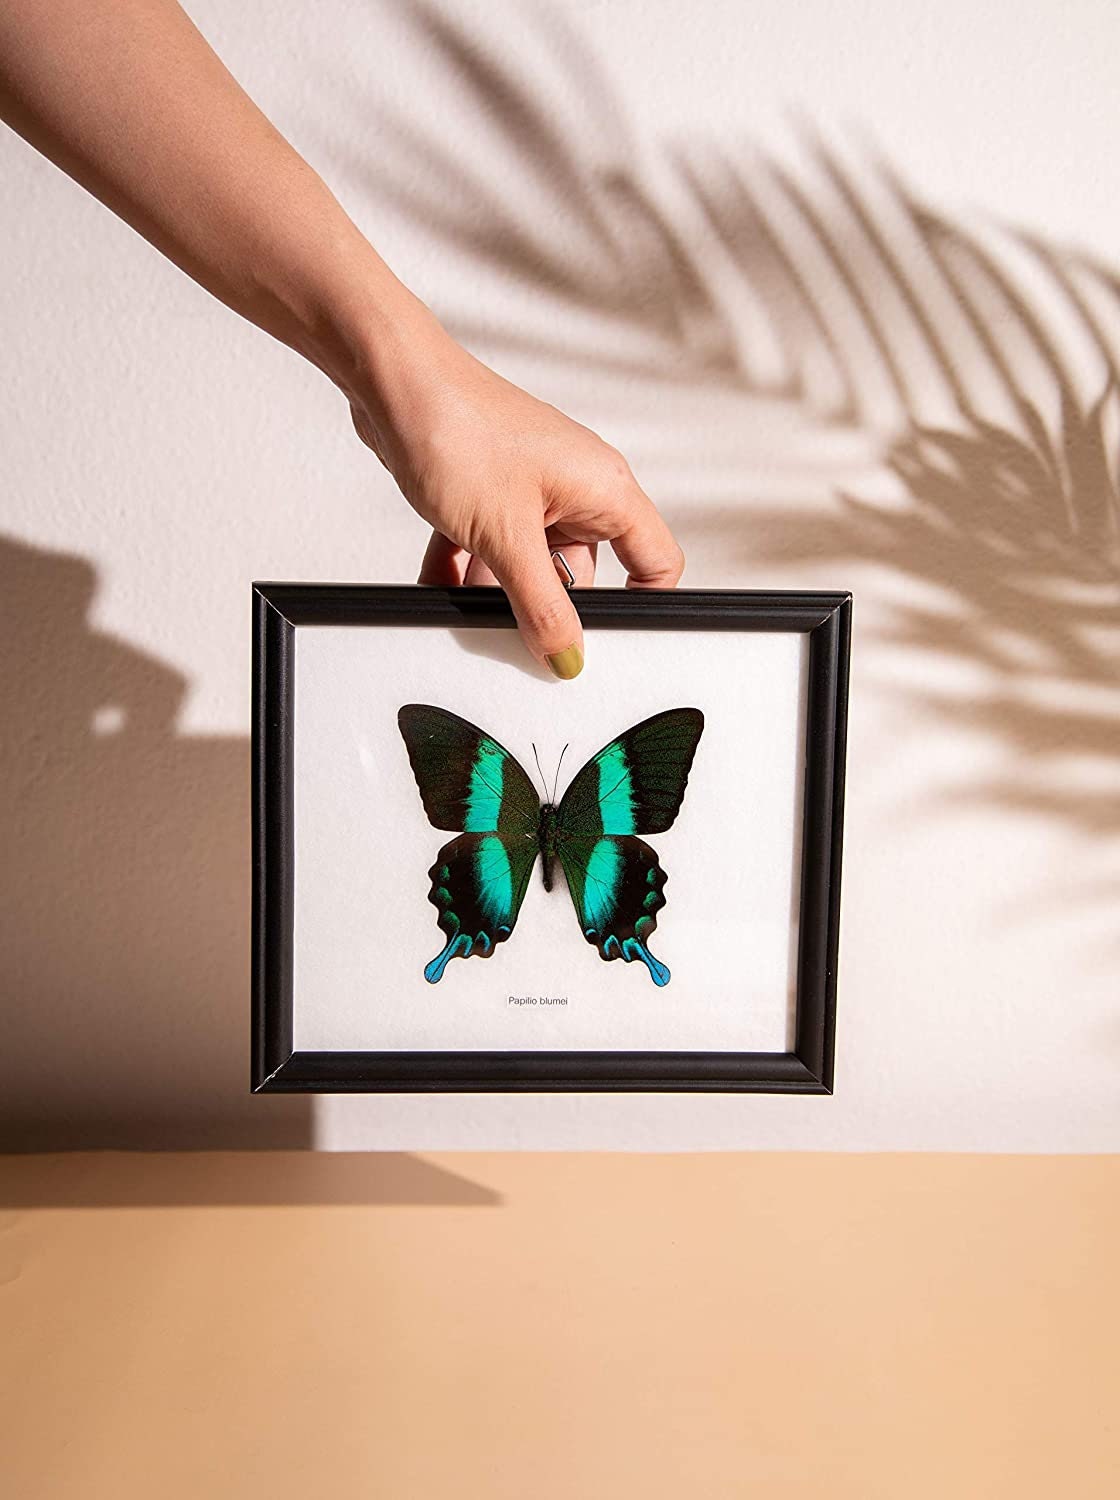 The Green Swallowtail Butterfly (Papilio blumei) Mounted in a Wall Hanging Frame, Taxidermy Home Decor, 8 x 7 inches